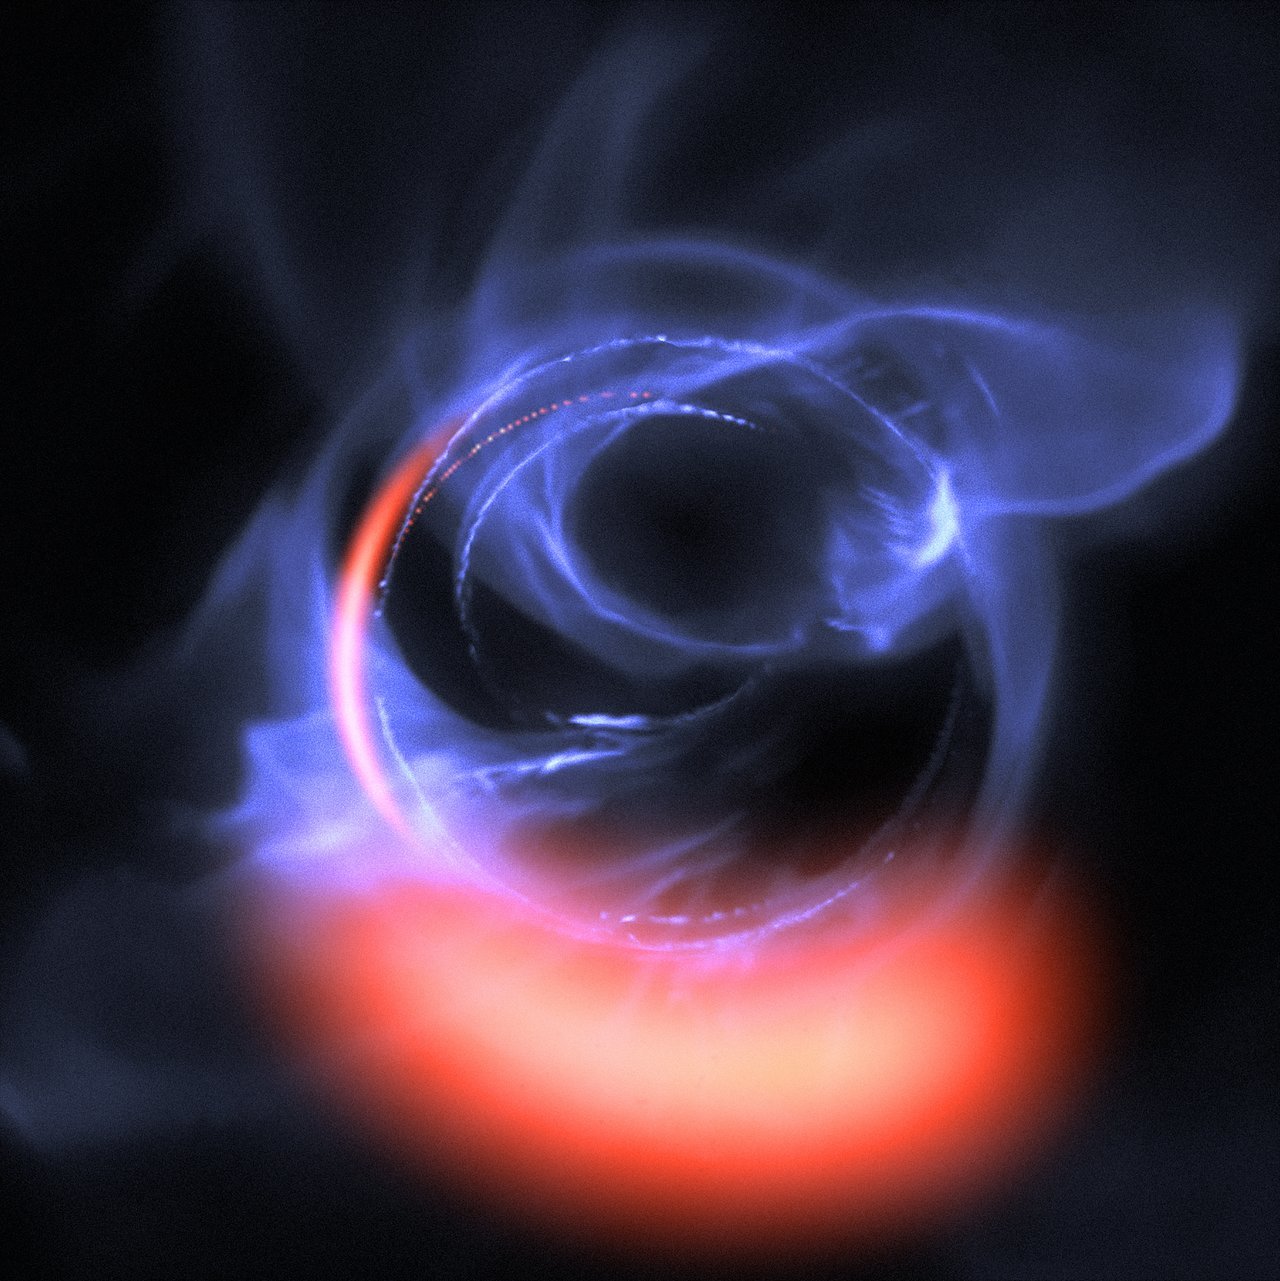 Most Detailed Observations Of Material Orbiting Close To A Black Hole